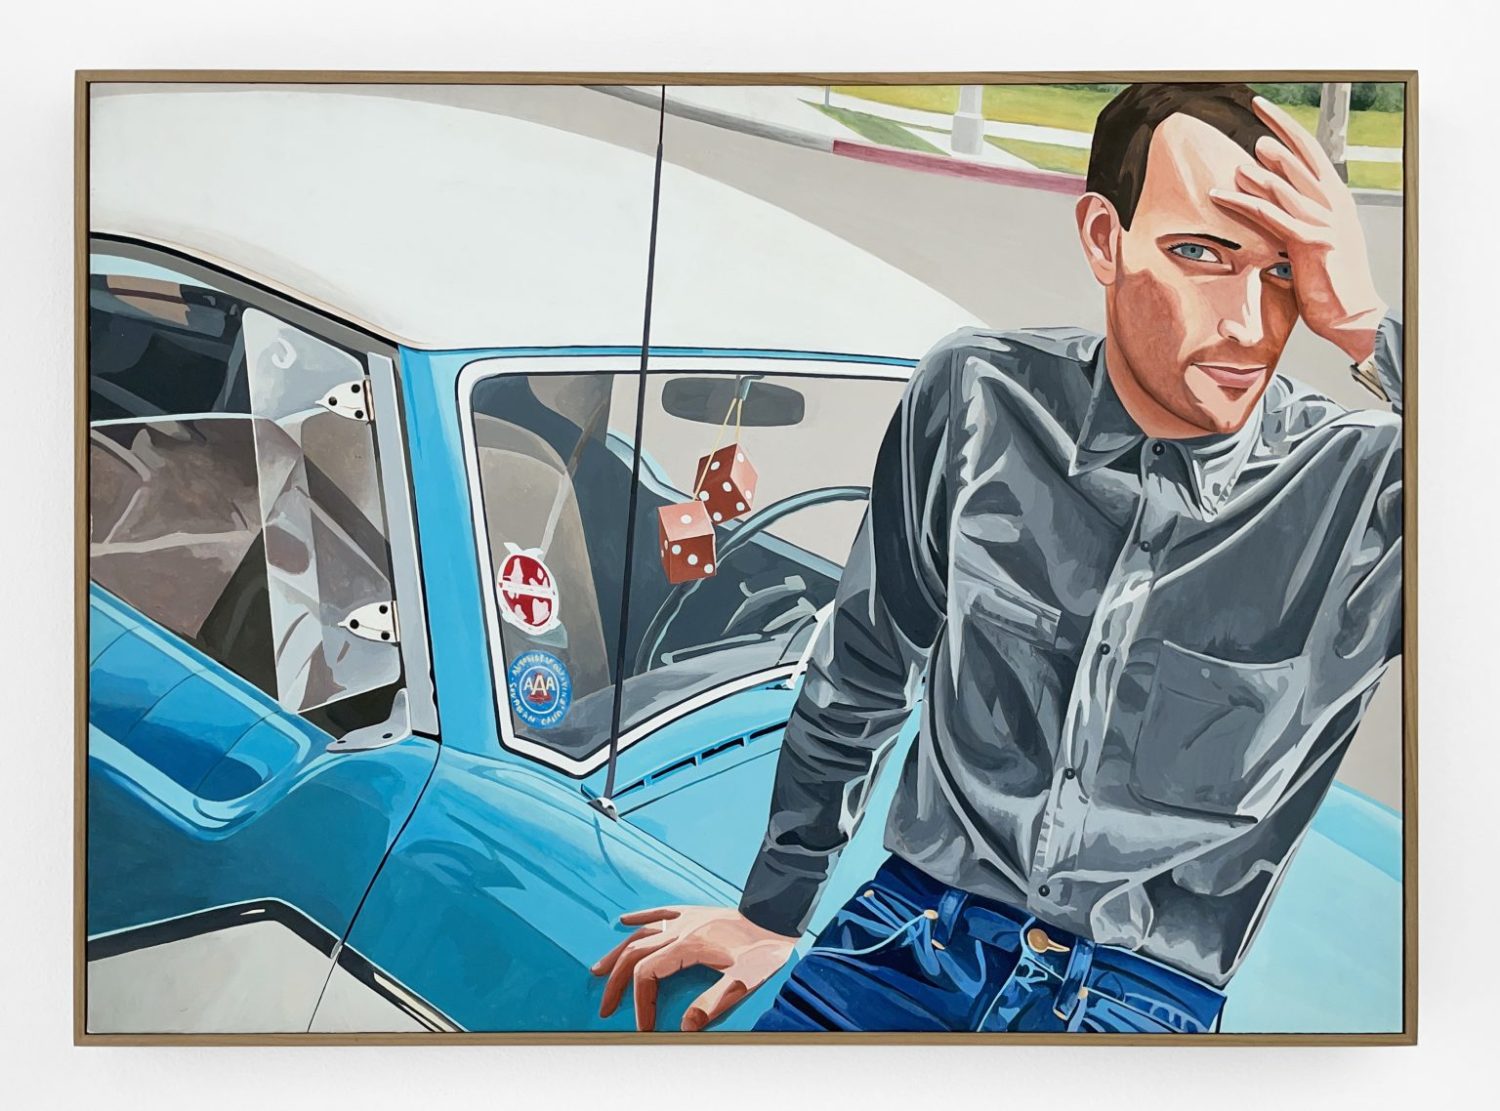 Nick Taggart Jules 1980 Acrylic on board mounted on panel 20.5 x 28.5 inches Courtesy of Odd Ark LA